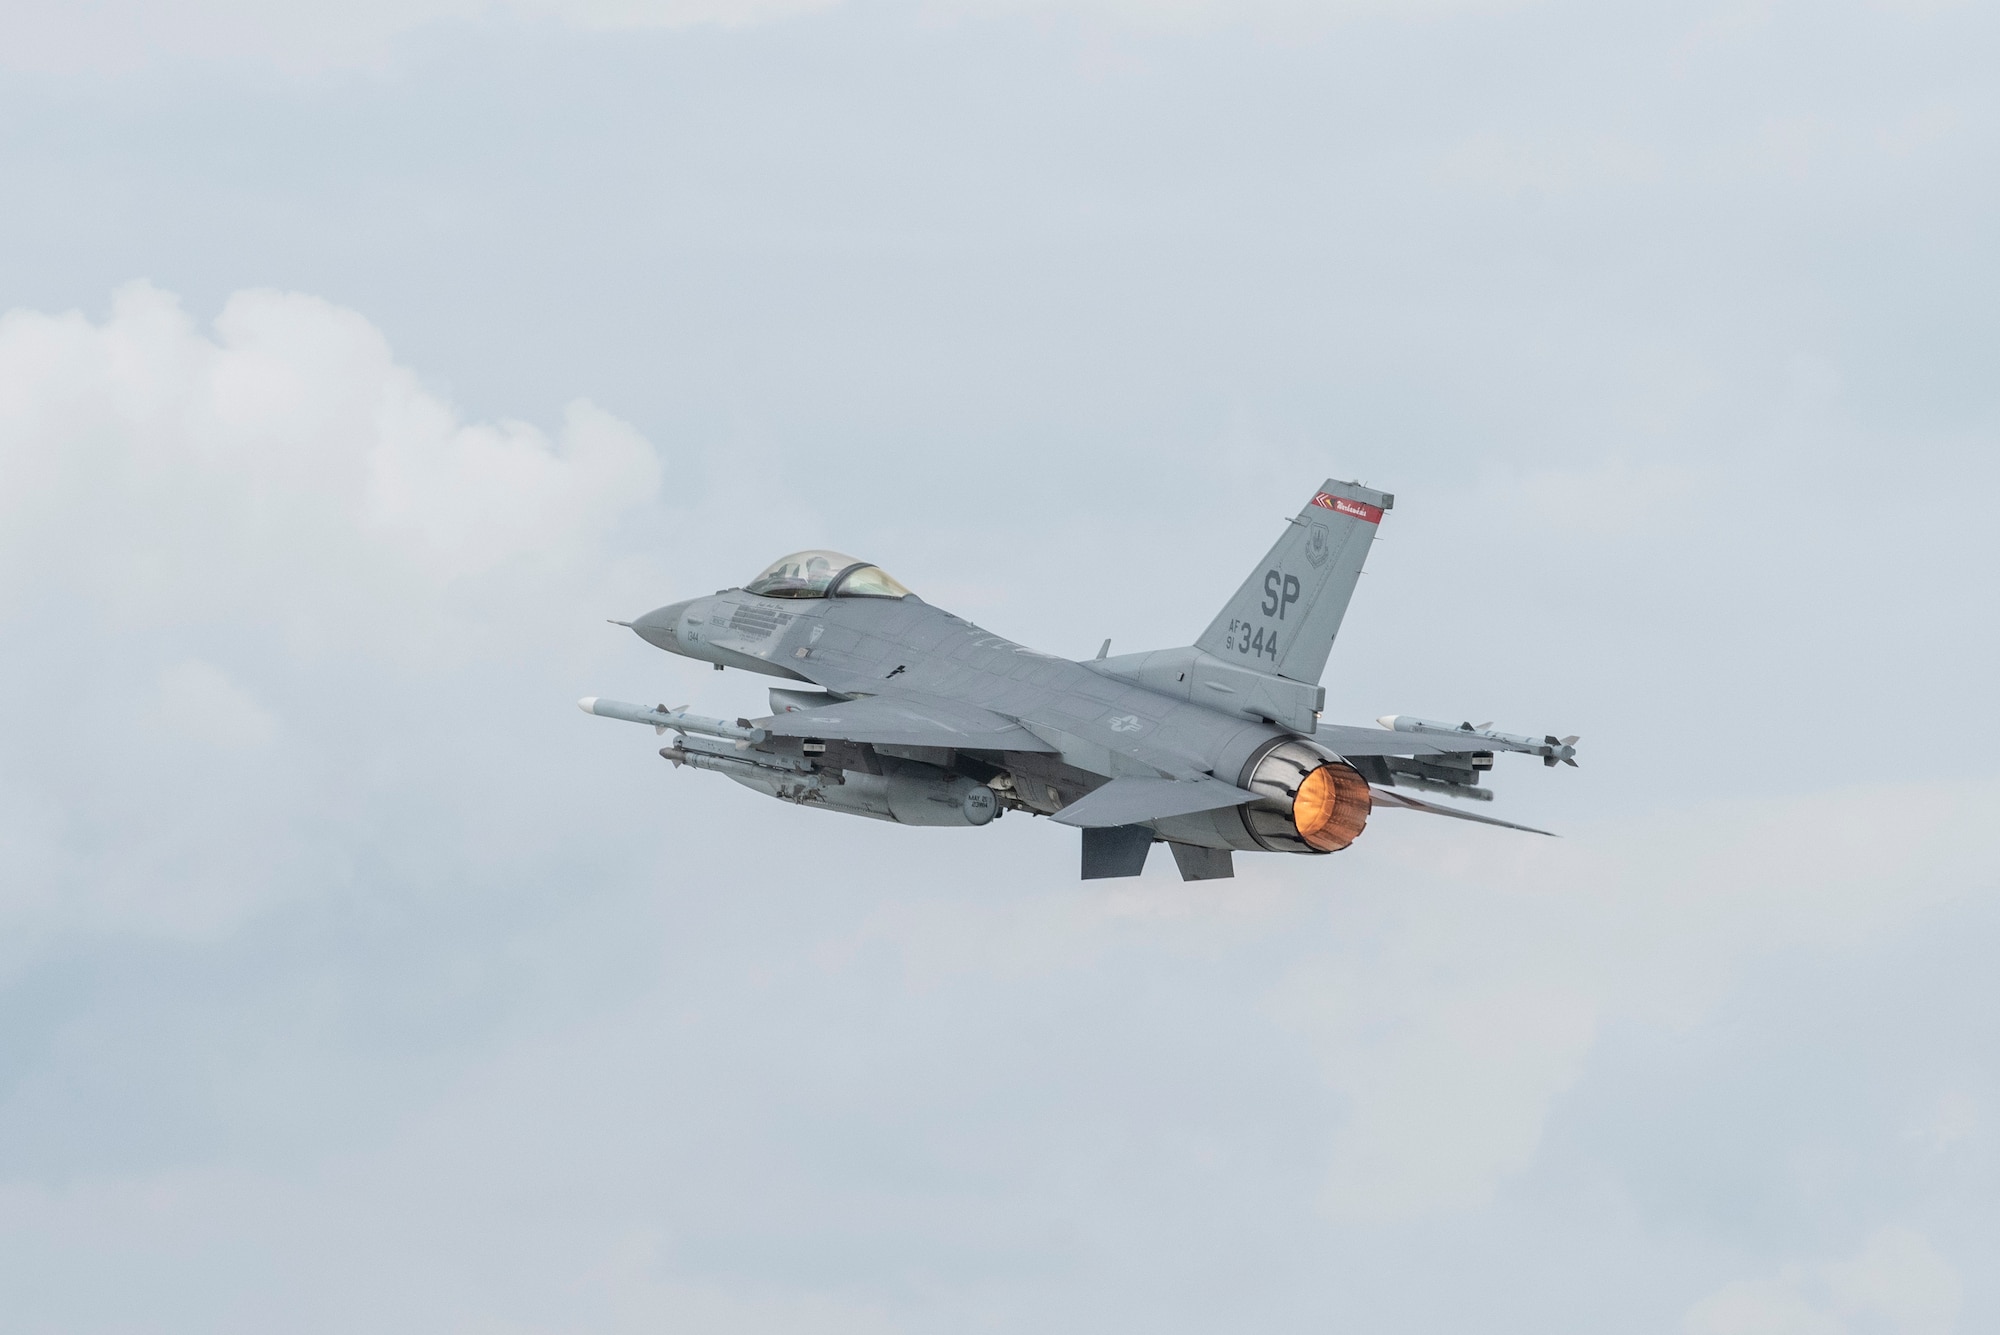 A U.S. Air Force F-16 Fighting Falcon assigned to the 480th Expeditionary Fighter Squadron takes off at Łask Air Base, Poland, August 2, 2021. The 480th EFS is training with the Polish air force in support of Operation Atlantic Resolve. (U.S. Air Force photo by Tech. Sgt. Anthony Plyler)